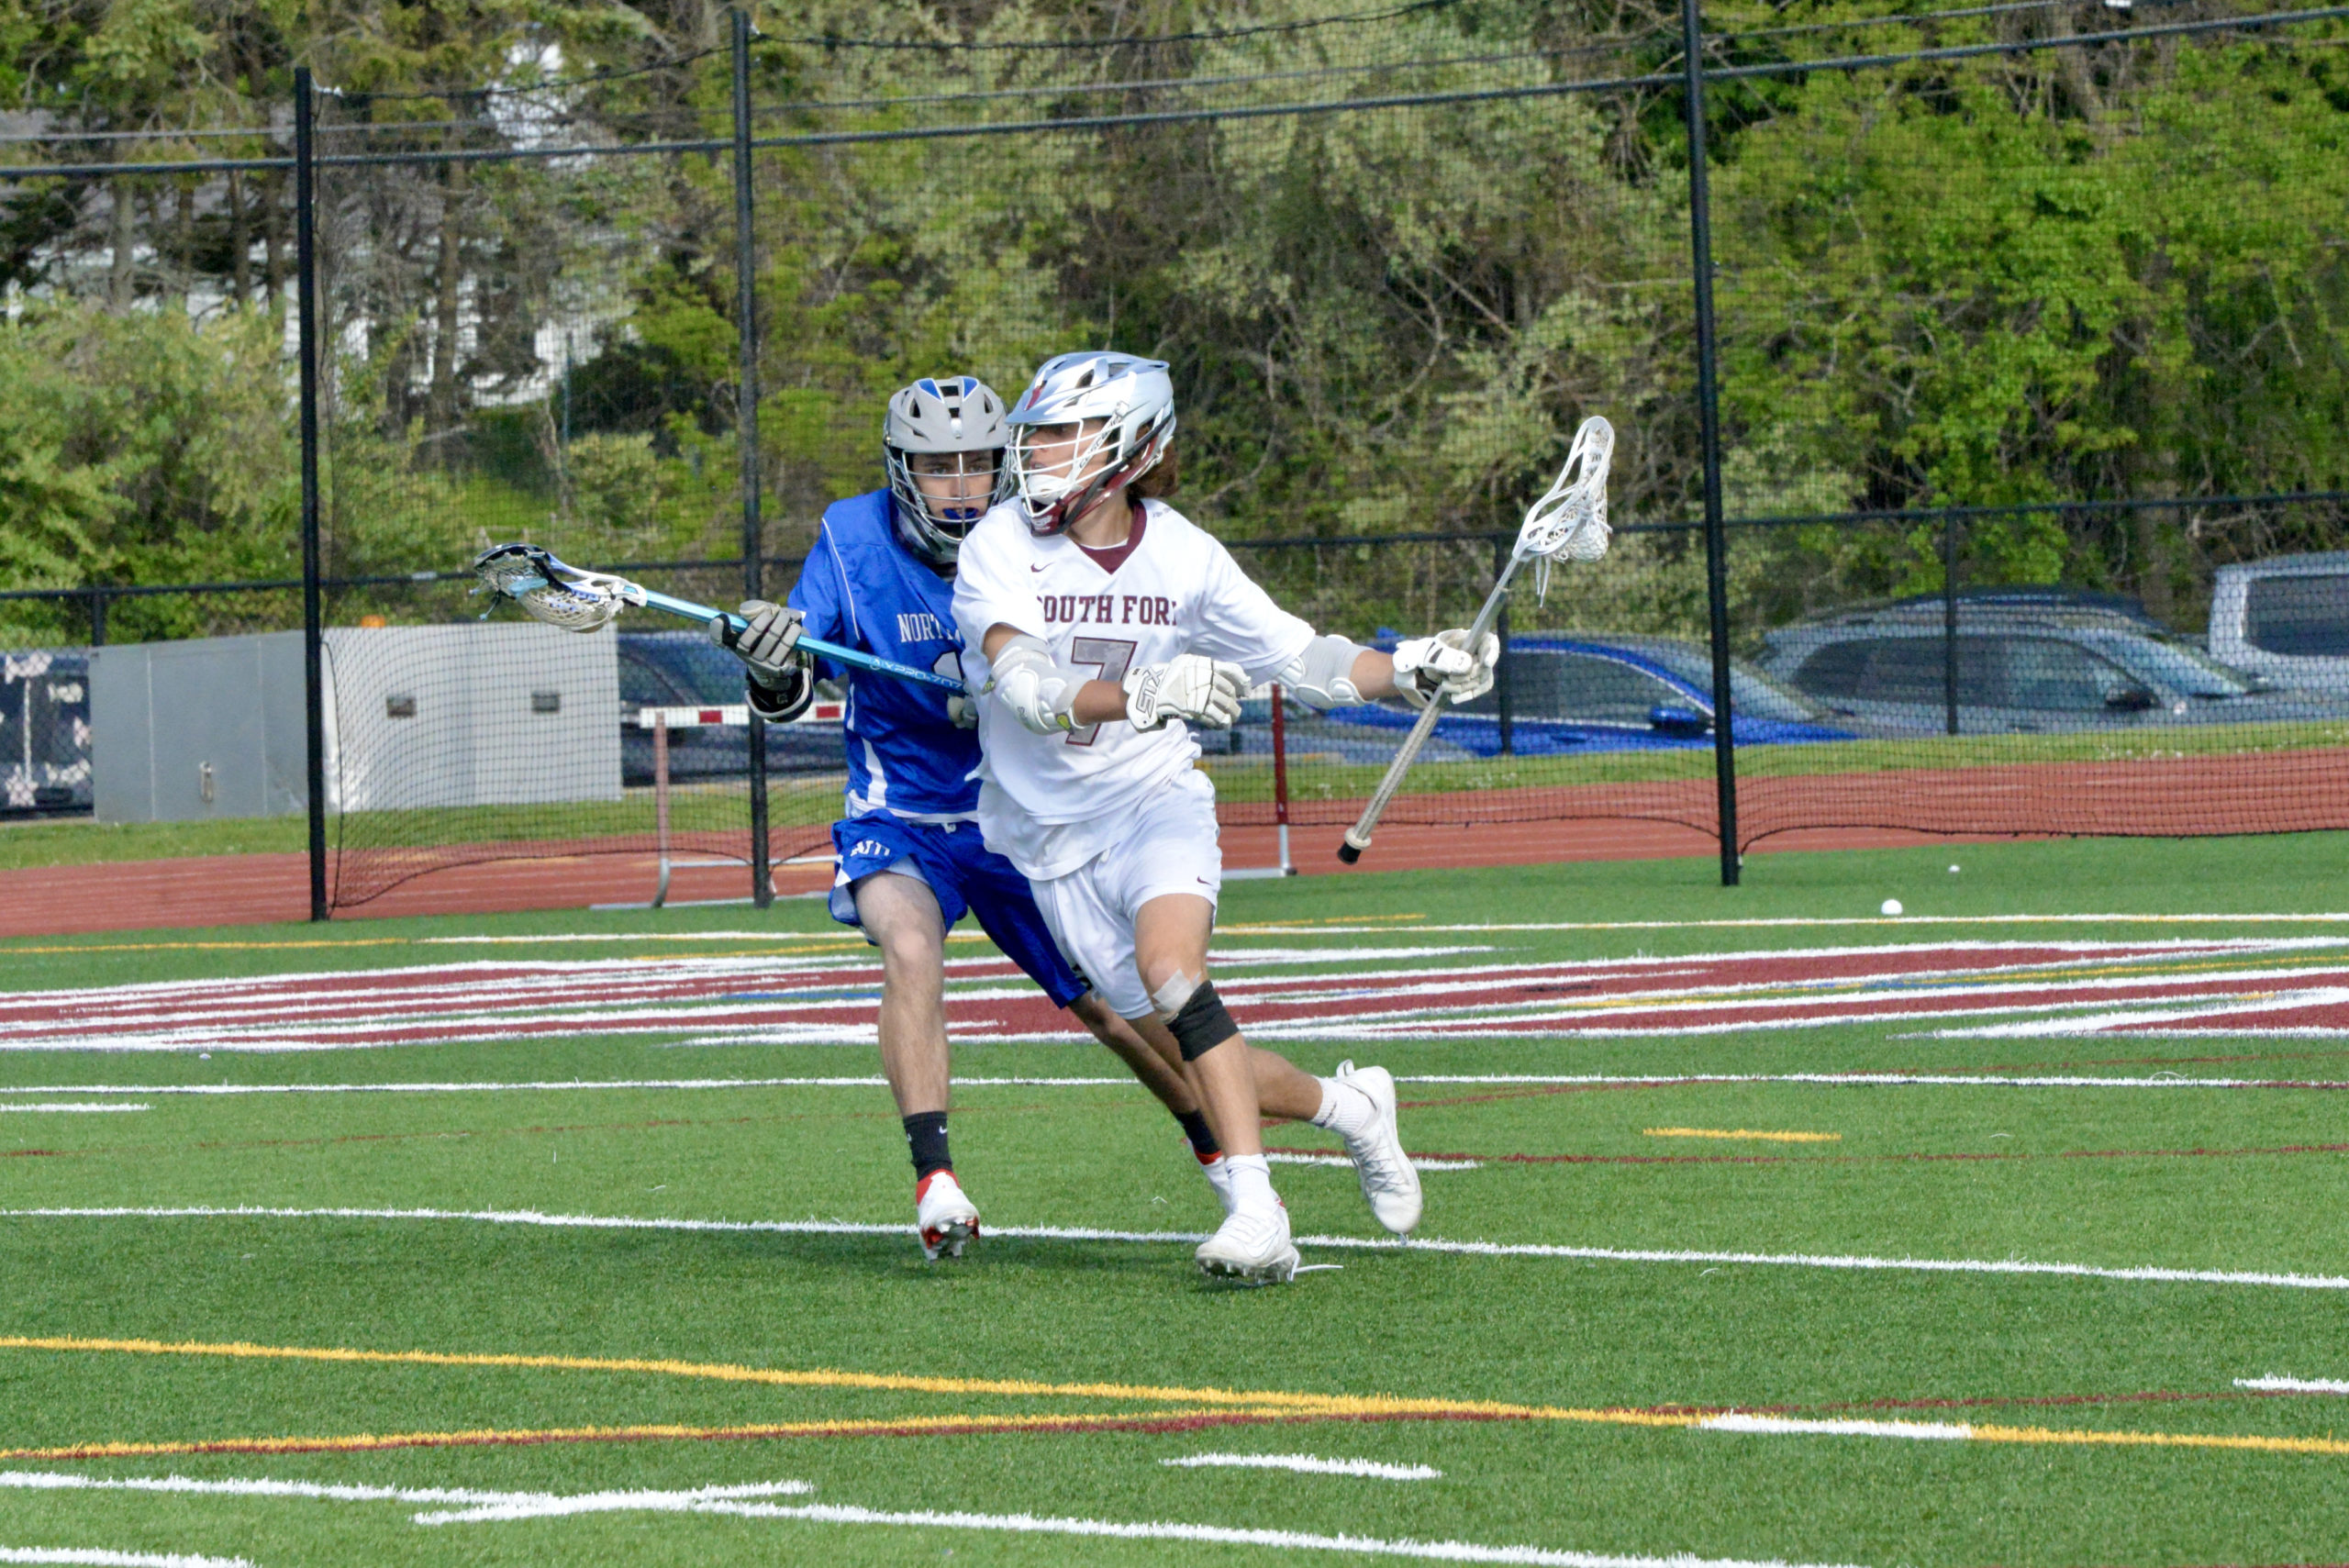 Southampton's Cooper Brindle takes on a North Babylon defender.